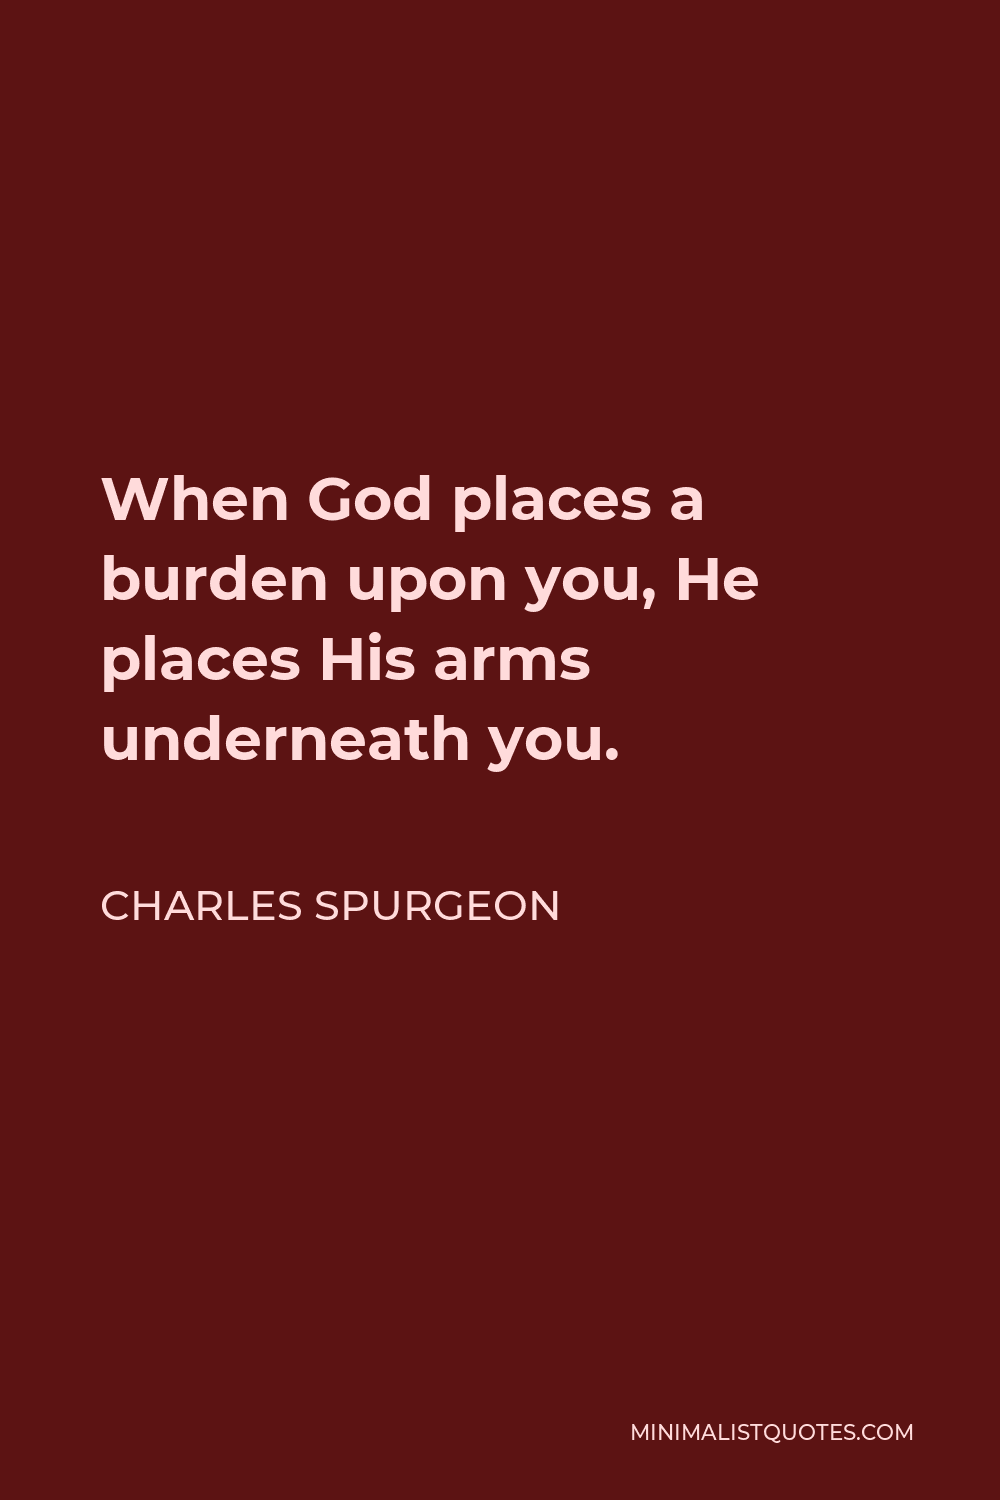 Charles Spurgeon Quote - When God places a burden upon you, He places His arms underneath you.